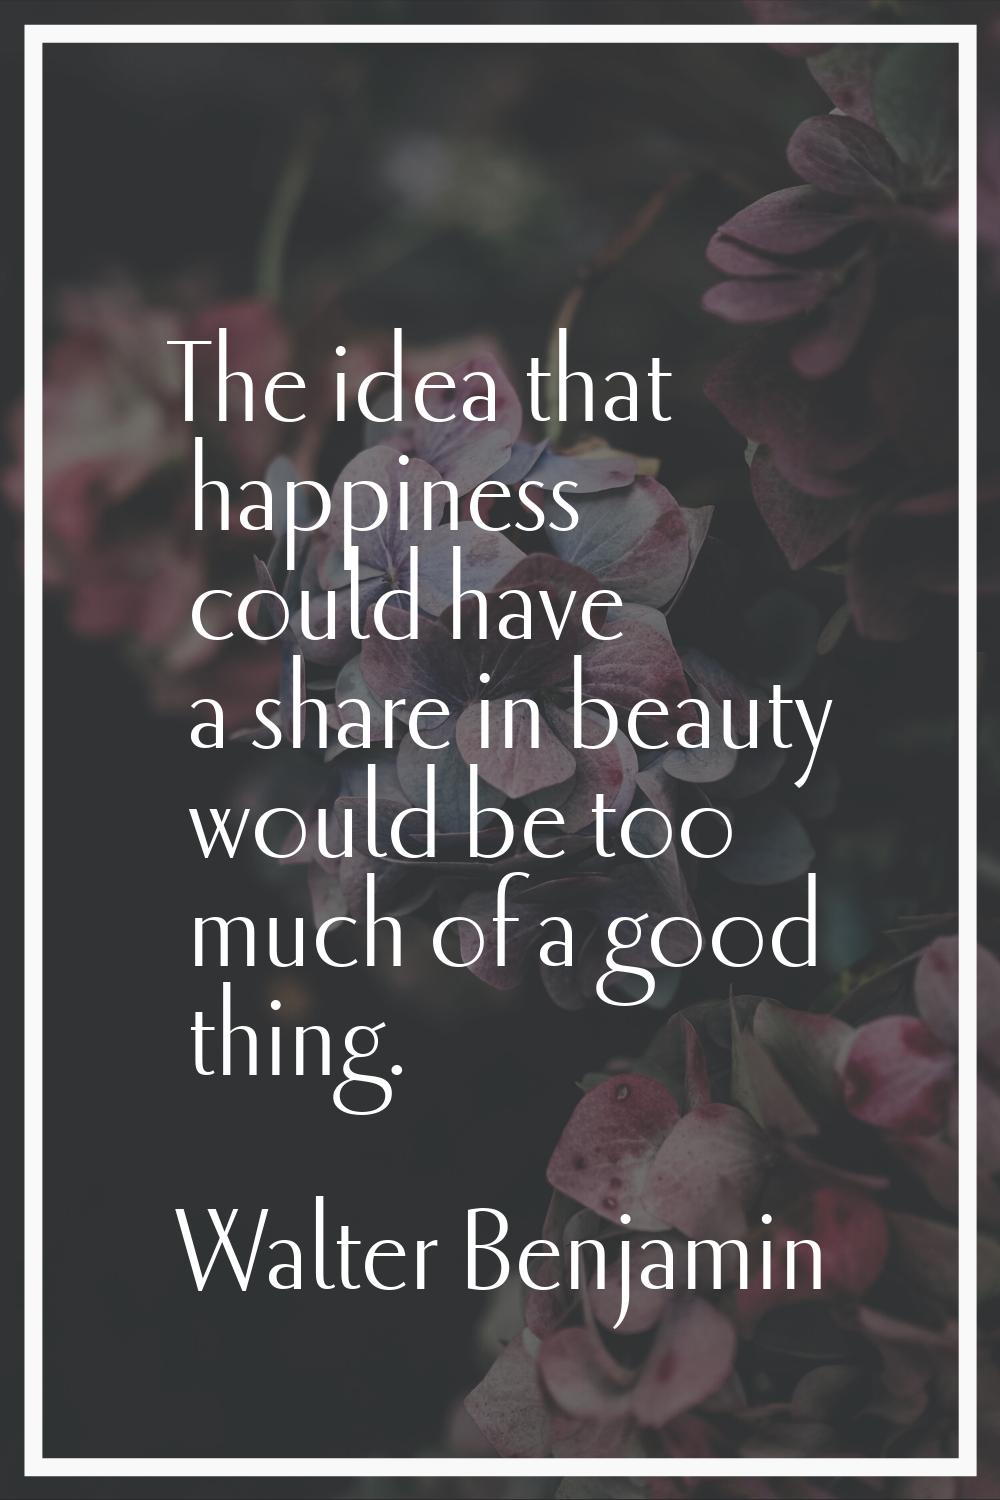 The idea that happiness could have a share in beauty would be too much of a good thing.